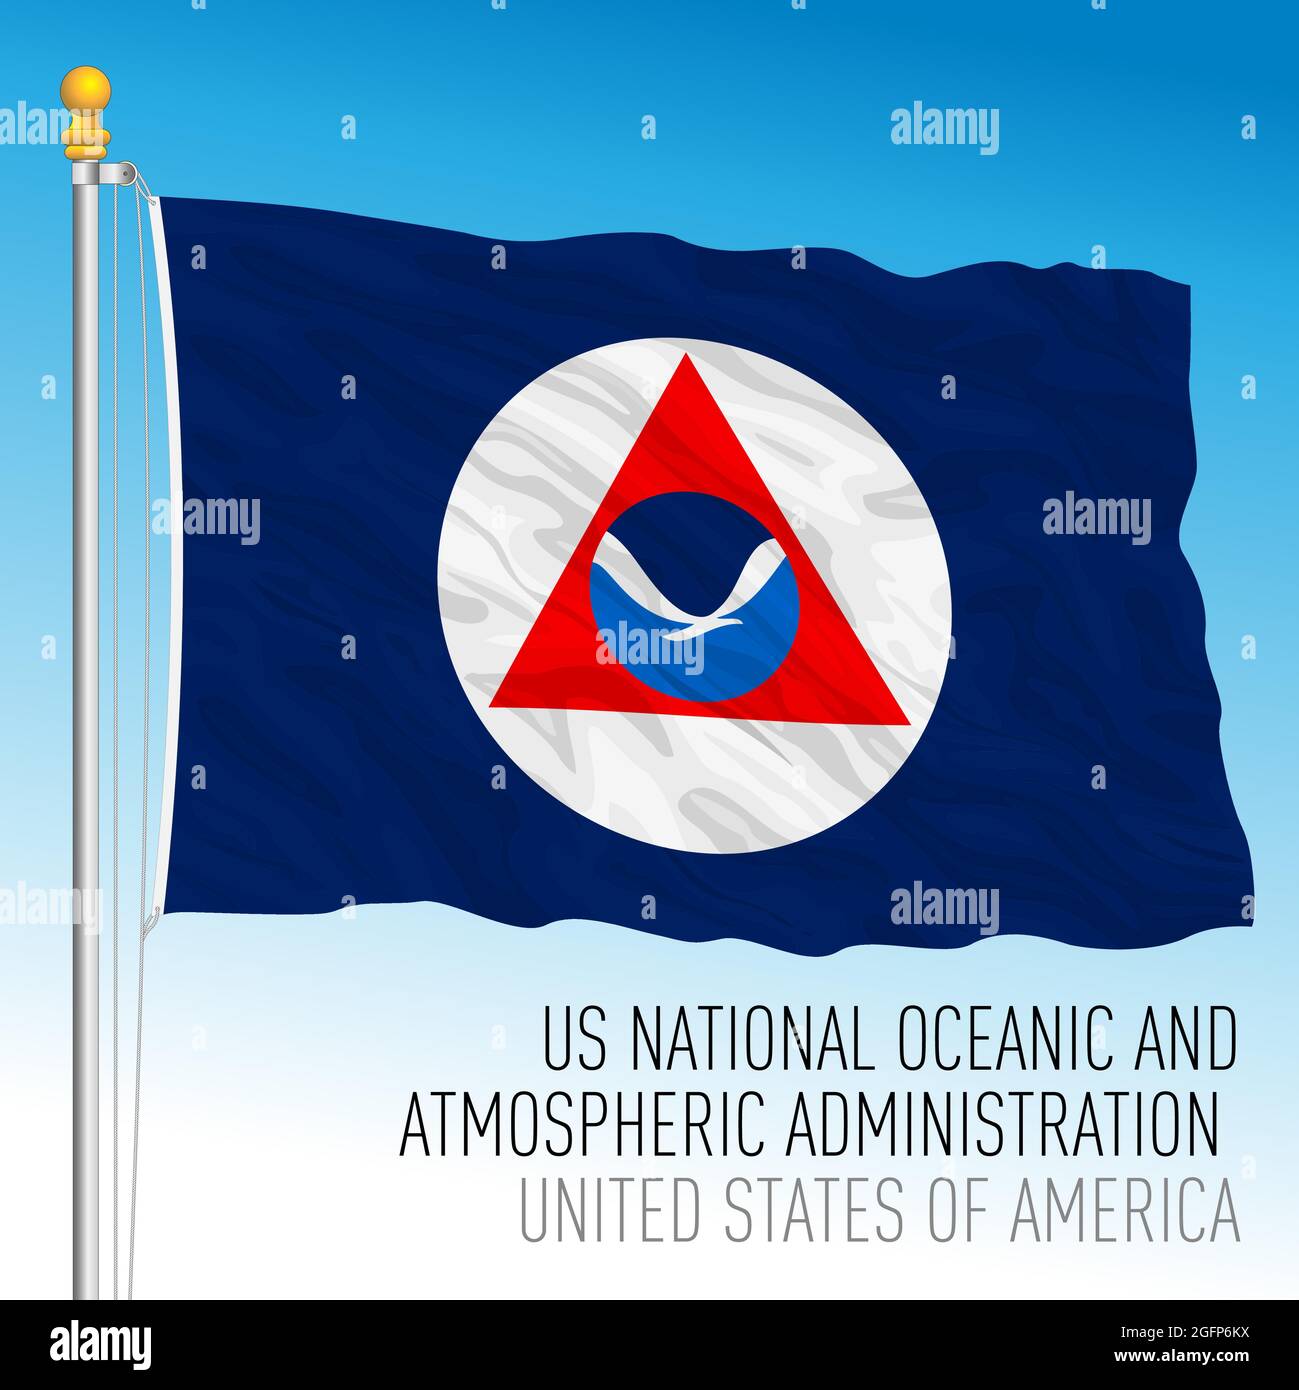 US National Oceanic and Atmospheric Administration flag, NOAA, United States of America, vector illustration Stock Vector